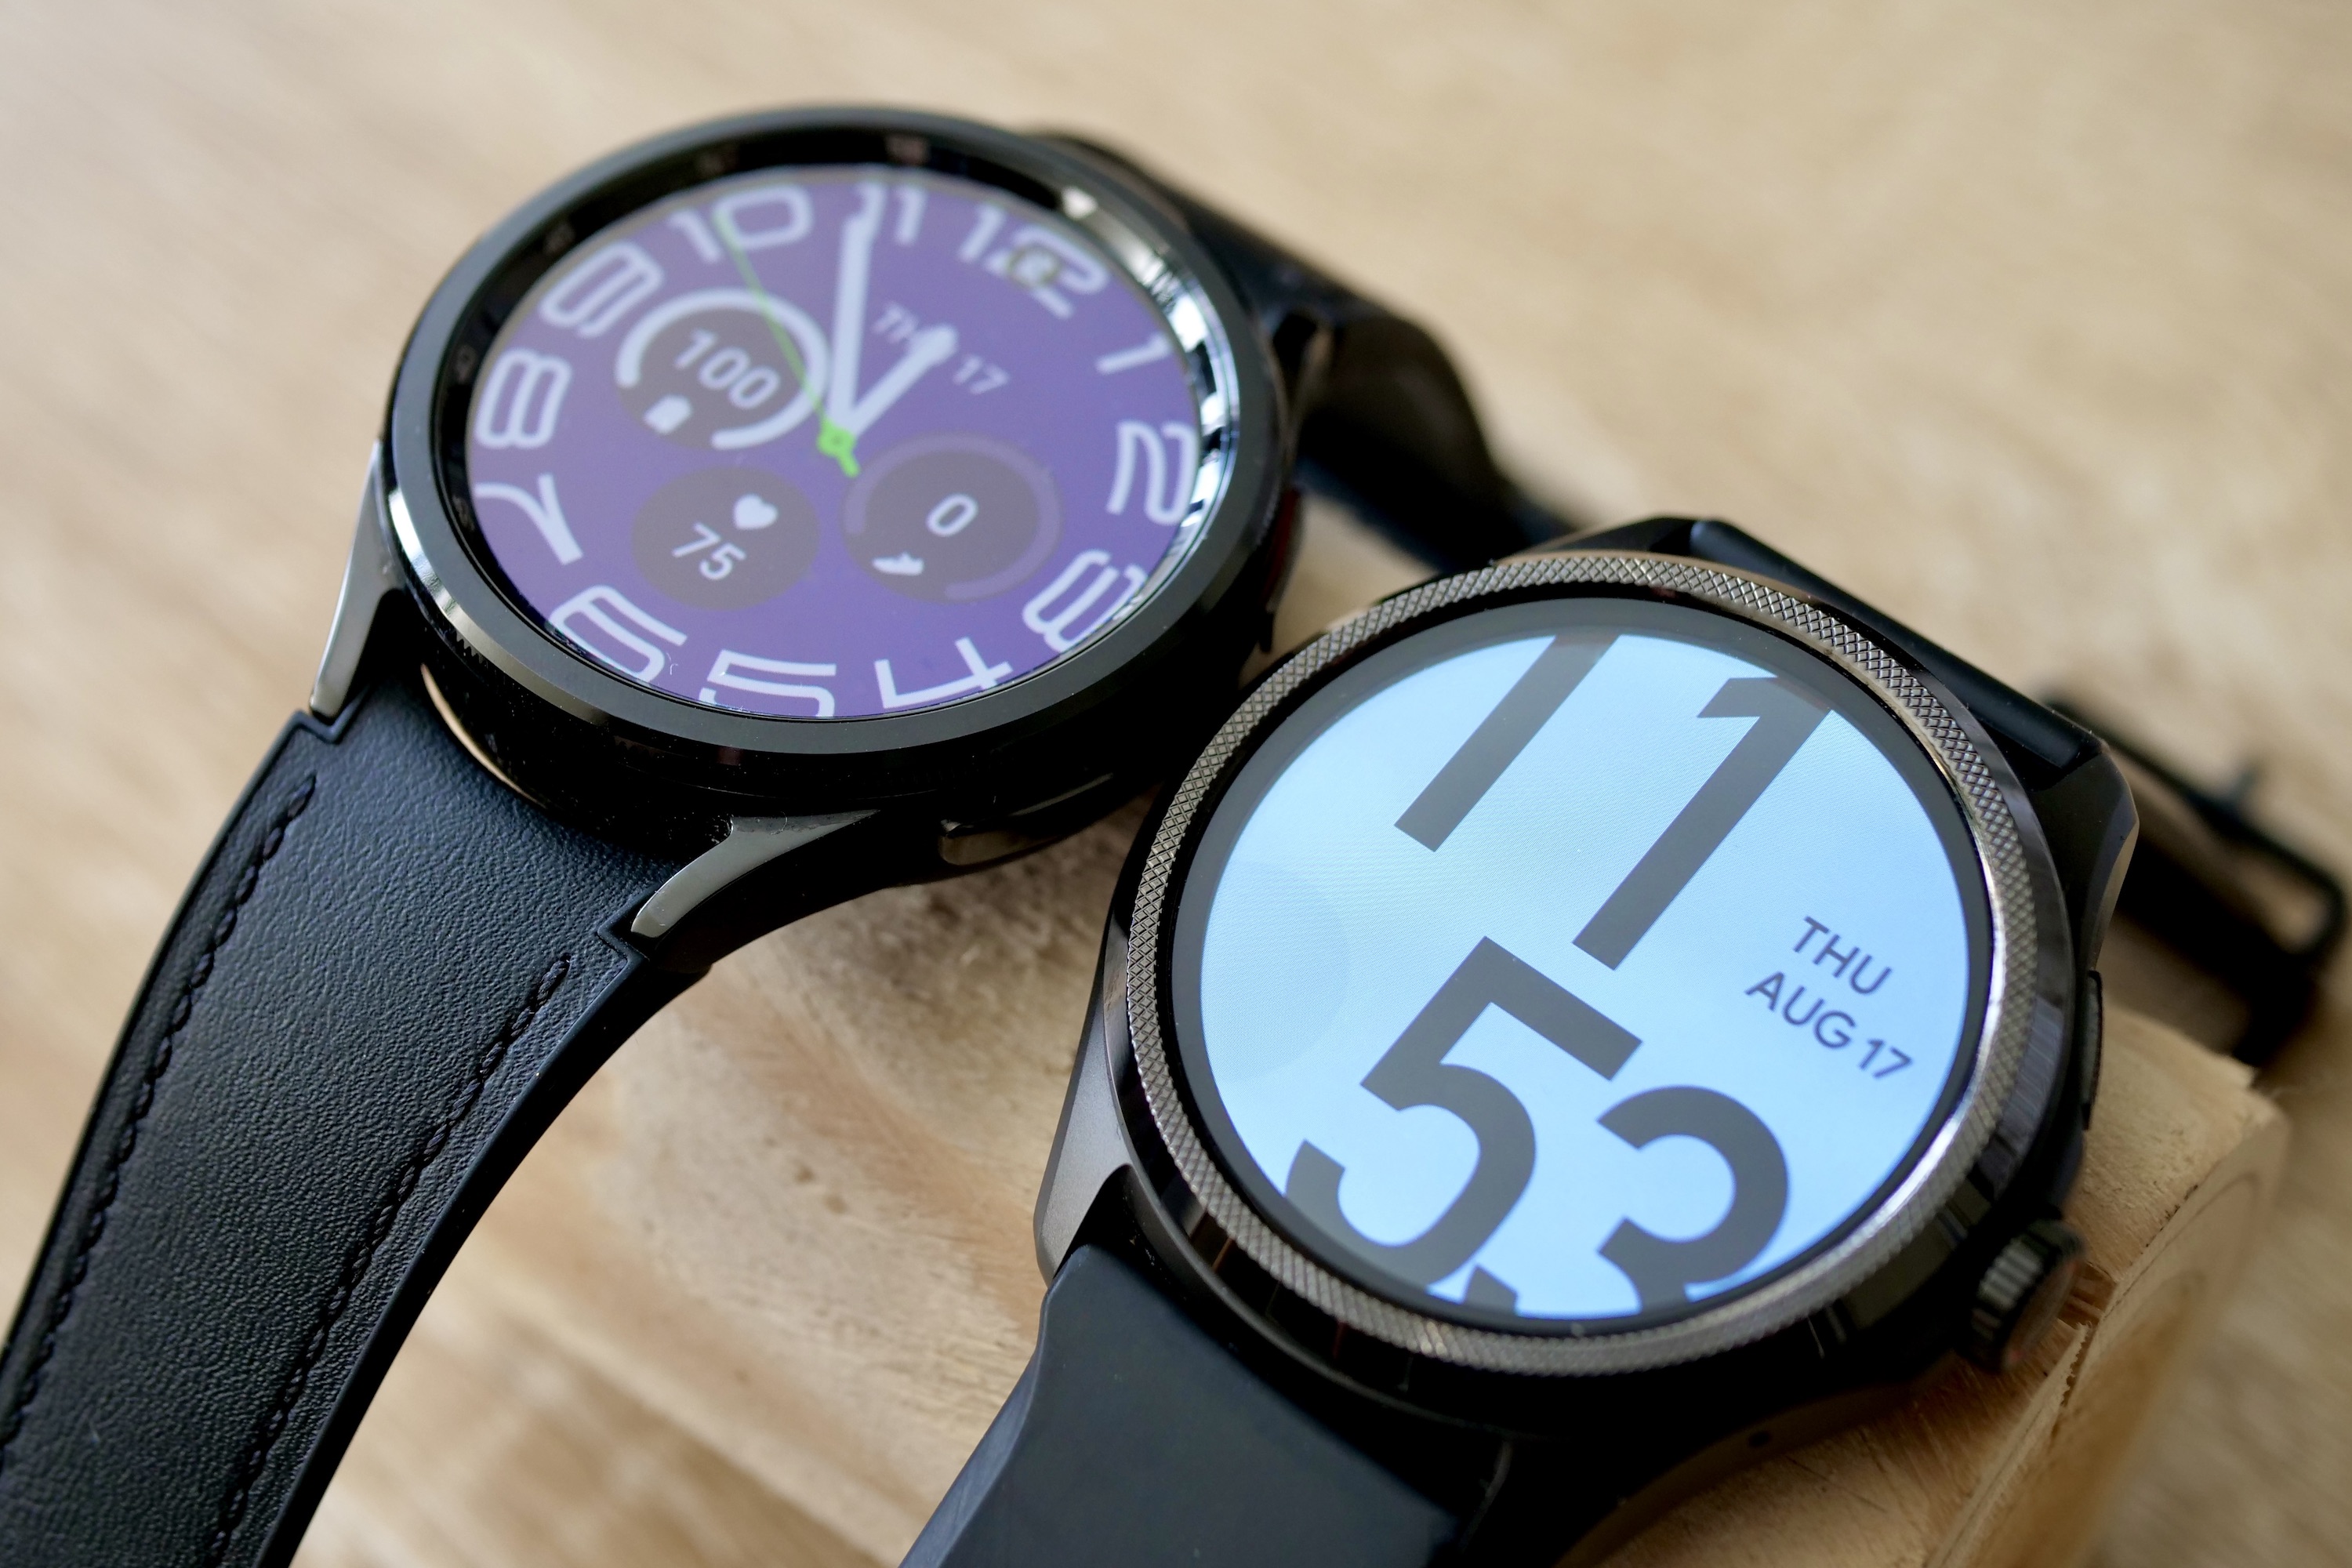 The Mobvoi Ticwatch Pro 5 and Samsung Galaxy Watch 6 Classic, showing different watch faces.